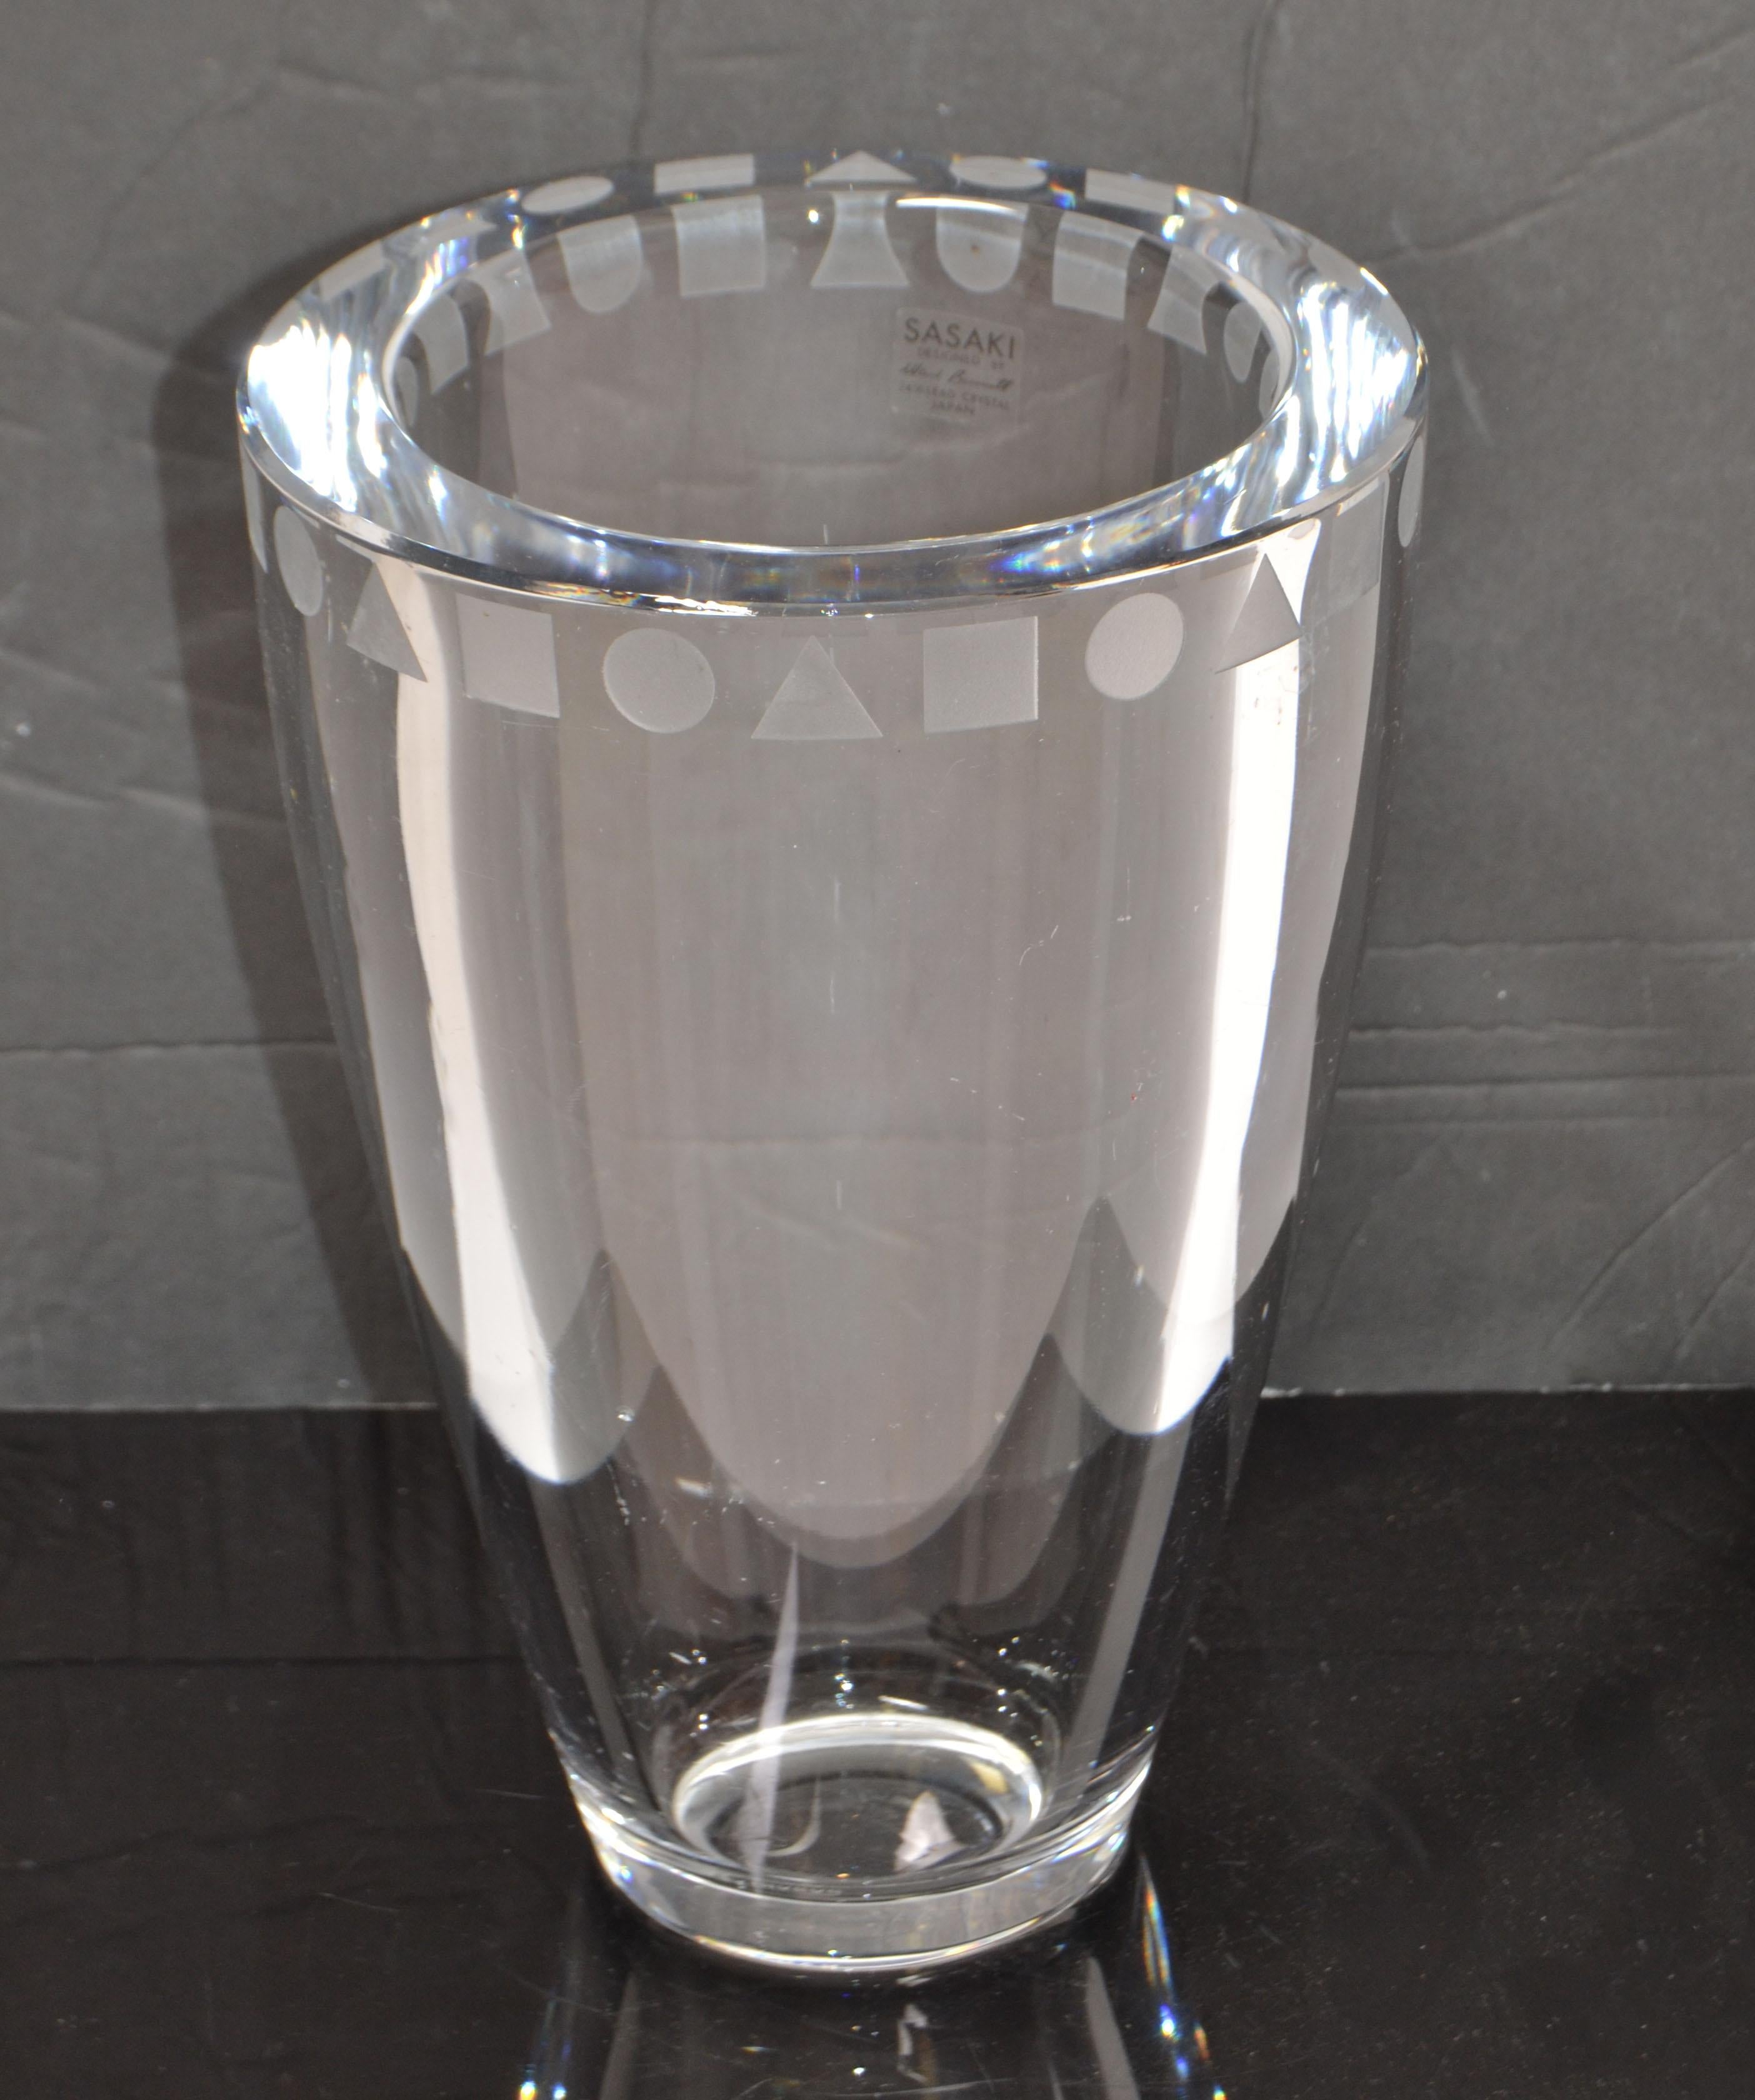 Signed Sasaki Sengai round lead crystal flower vase, etched to-clear, made in Japan and designed by Ward Bennett.
24% Lead Crystal.
Marked with Label and Engraved.
The vase is very heavy.
 